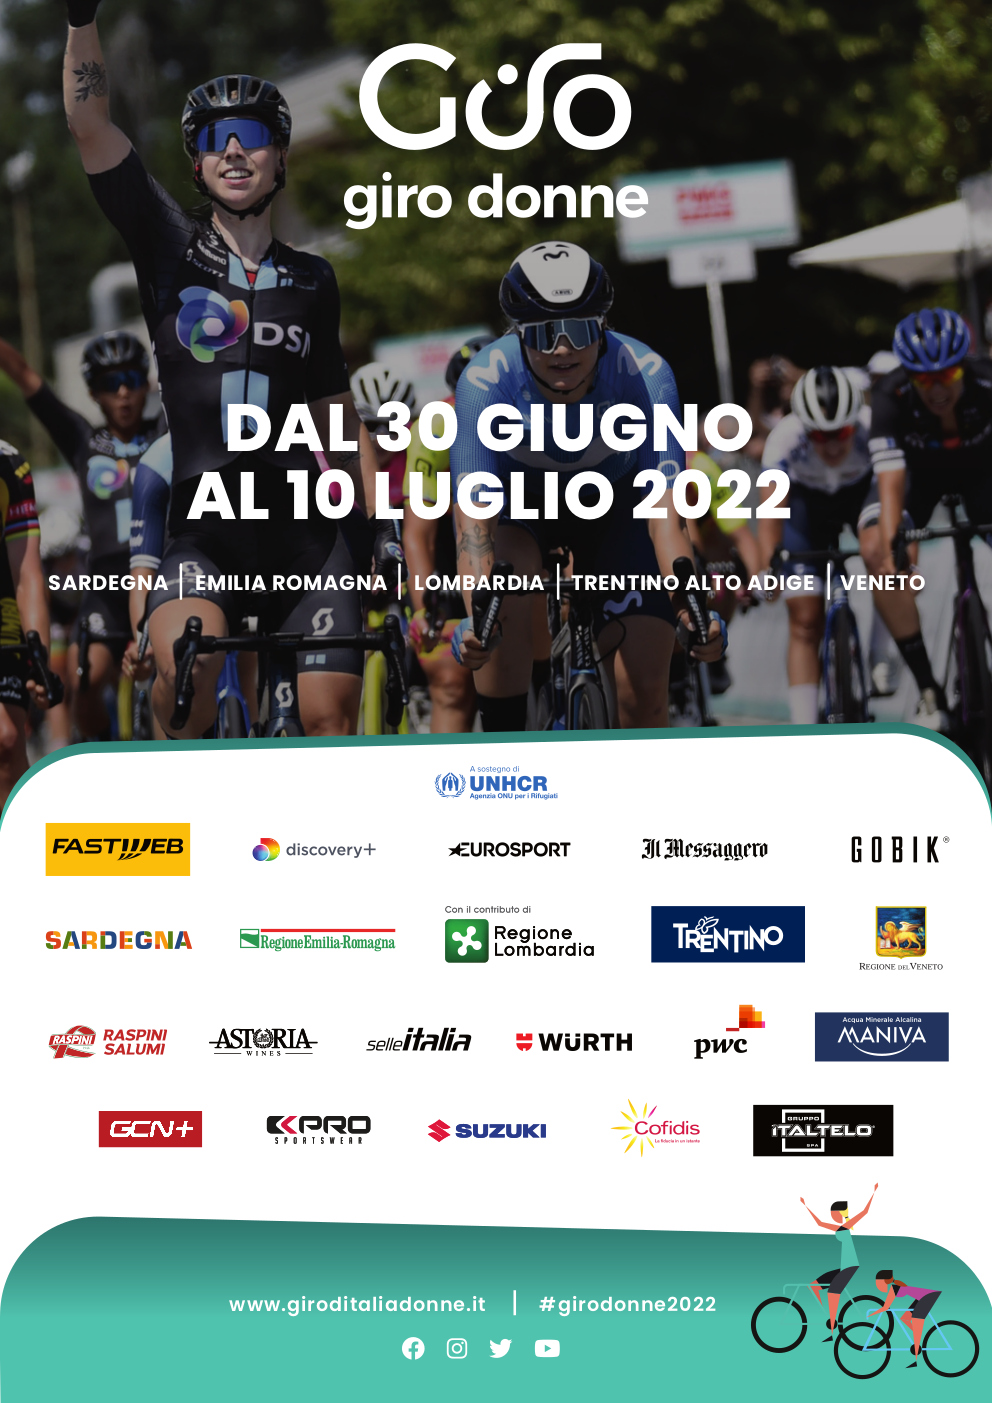 https://www.giroditaliadonne.it/2022/06/24/sponsors-partners-and-institutions-for-the-33rd-edition/